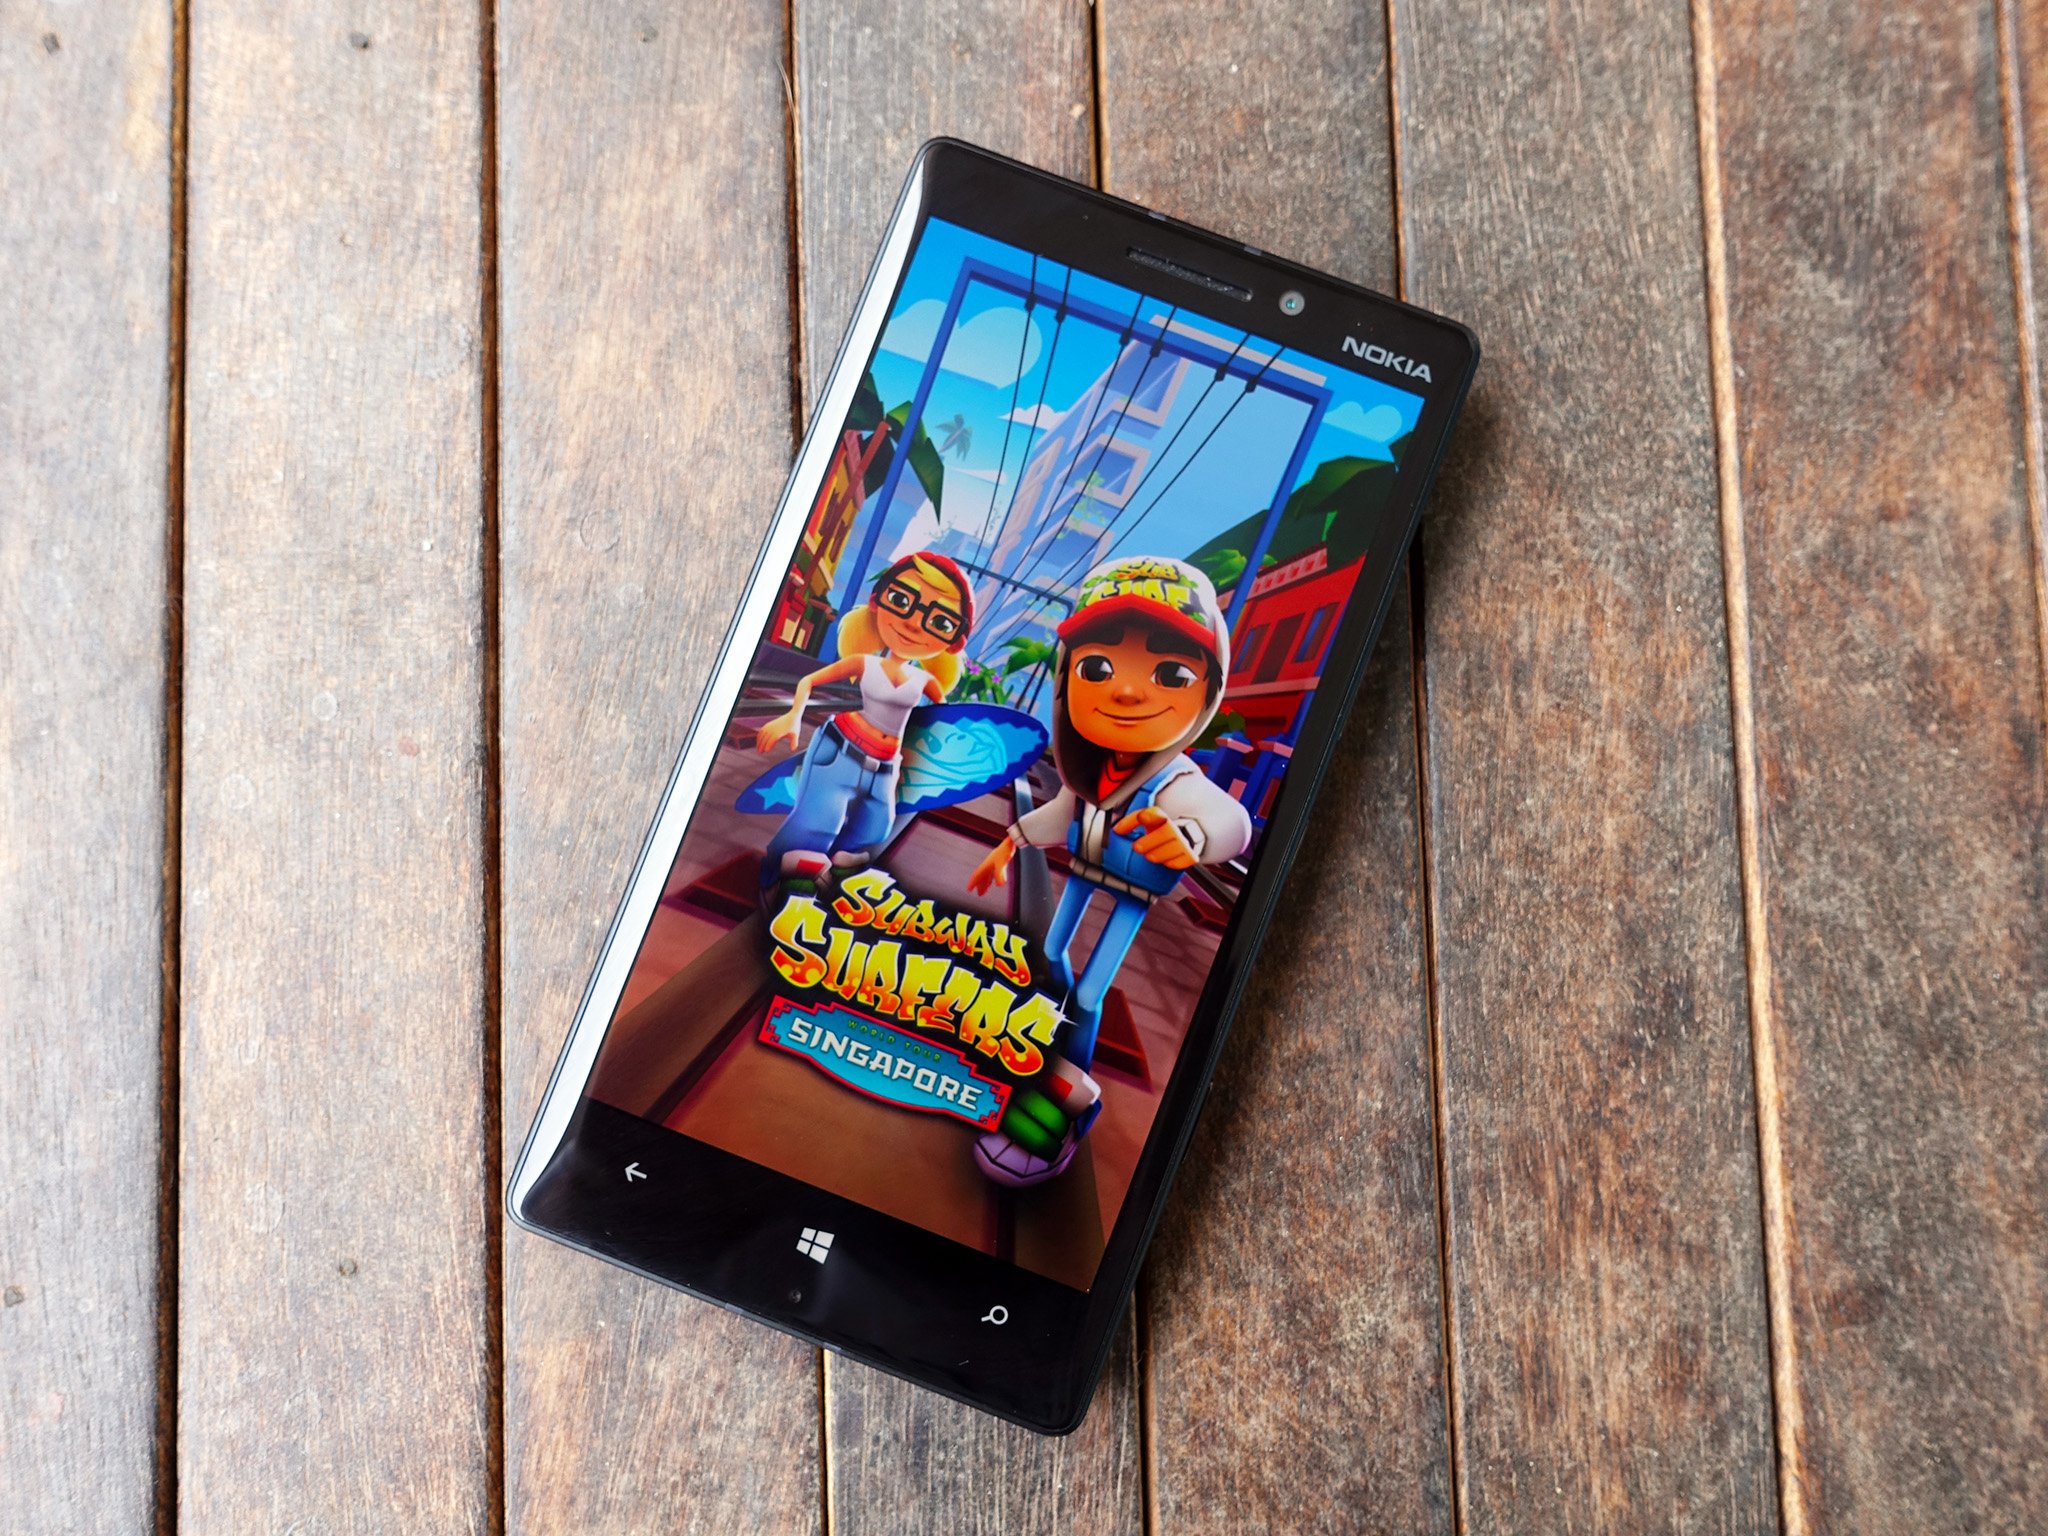 Subway Surfers now available on Windows Phone - MobileSyrup